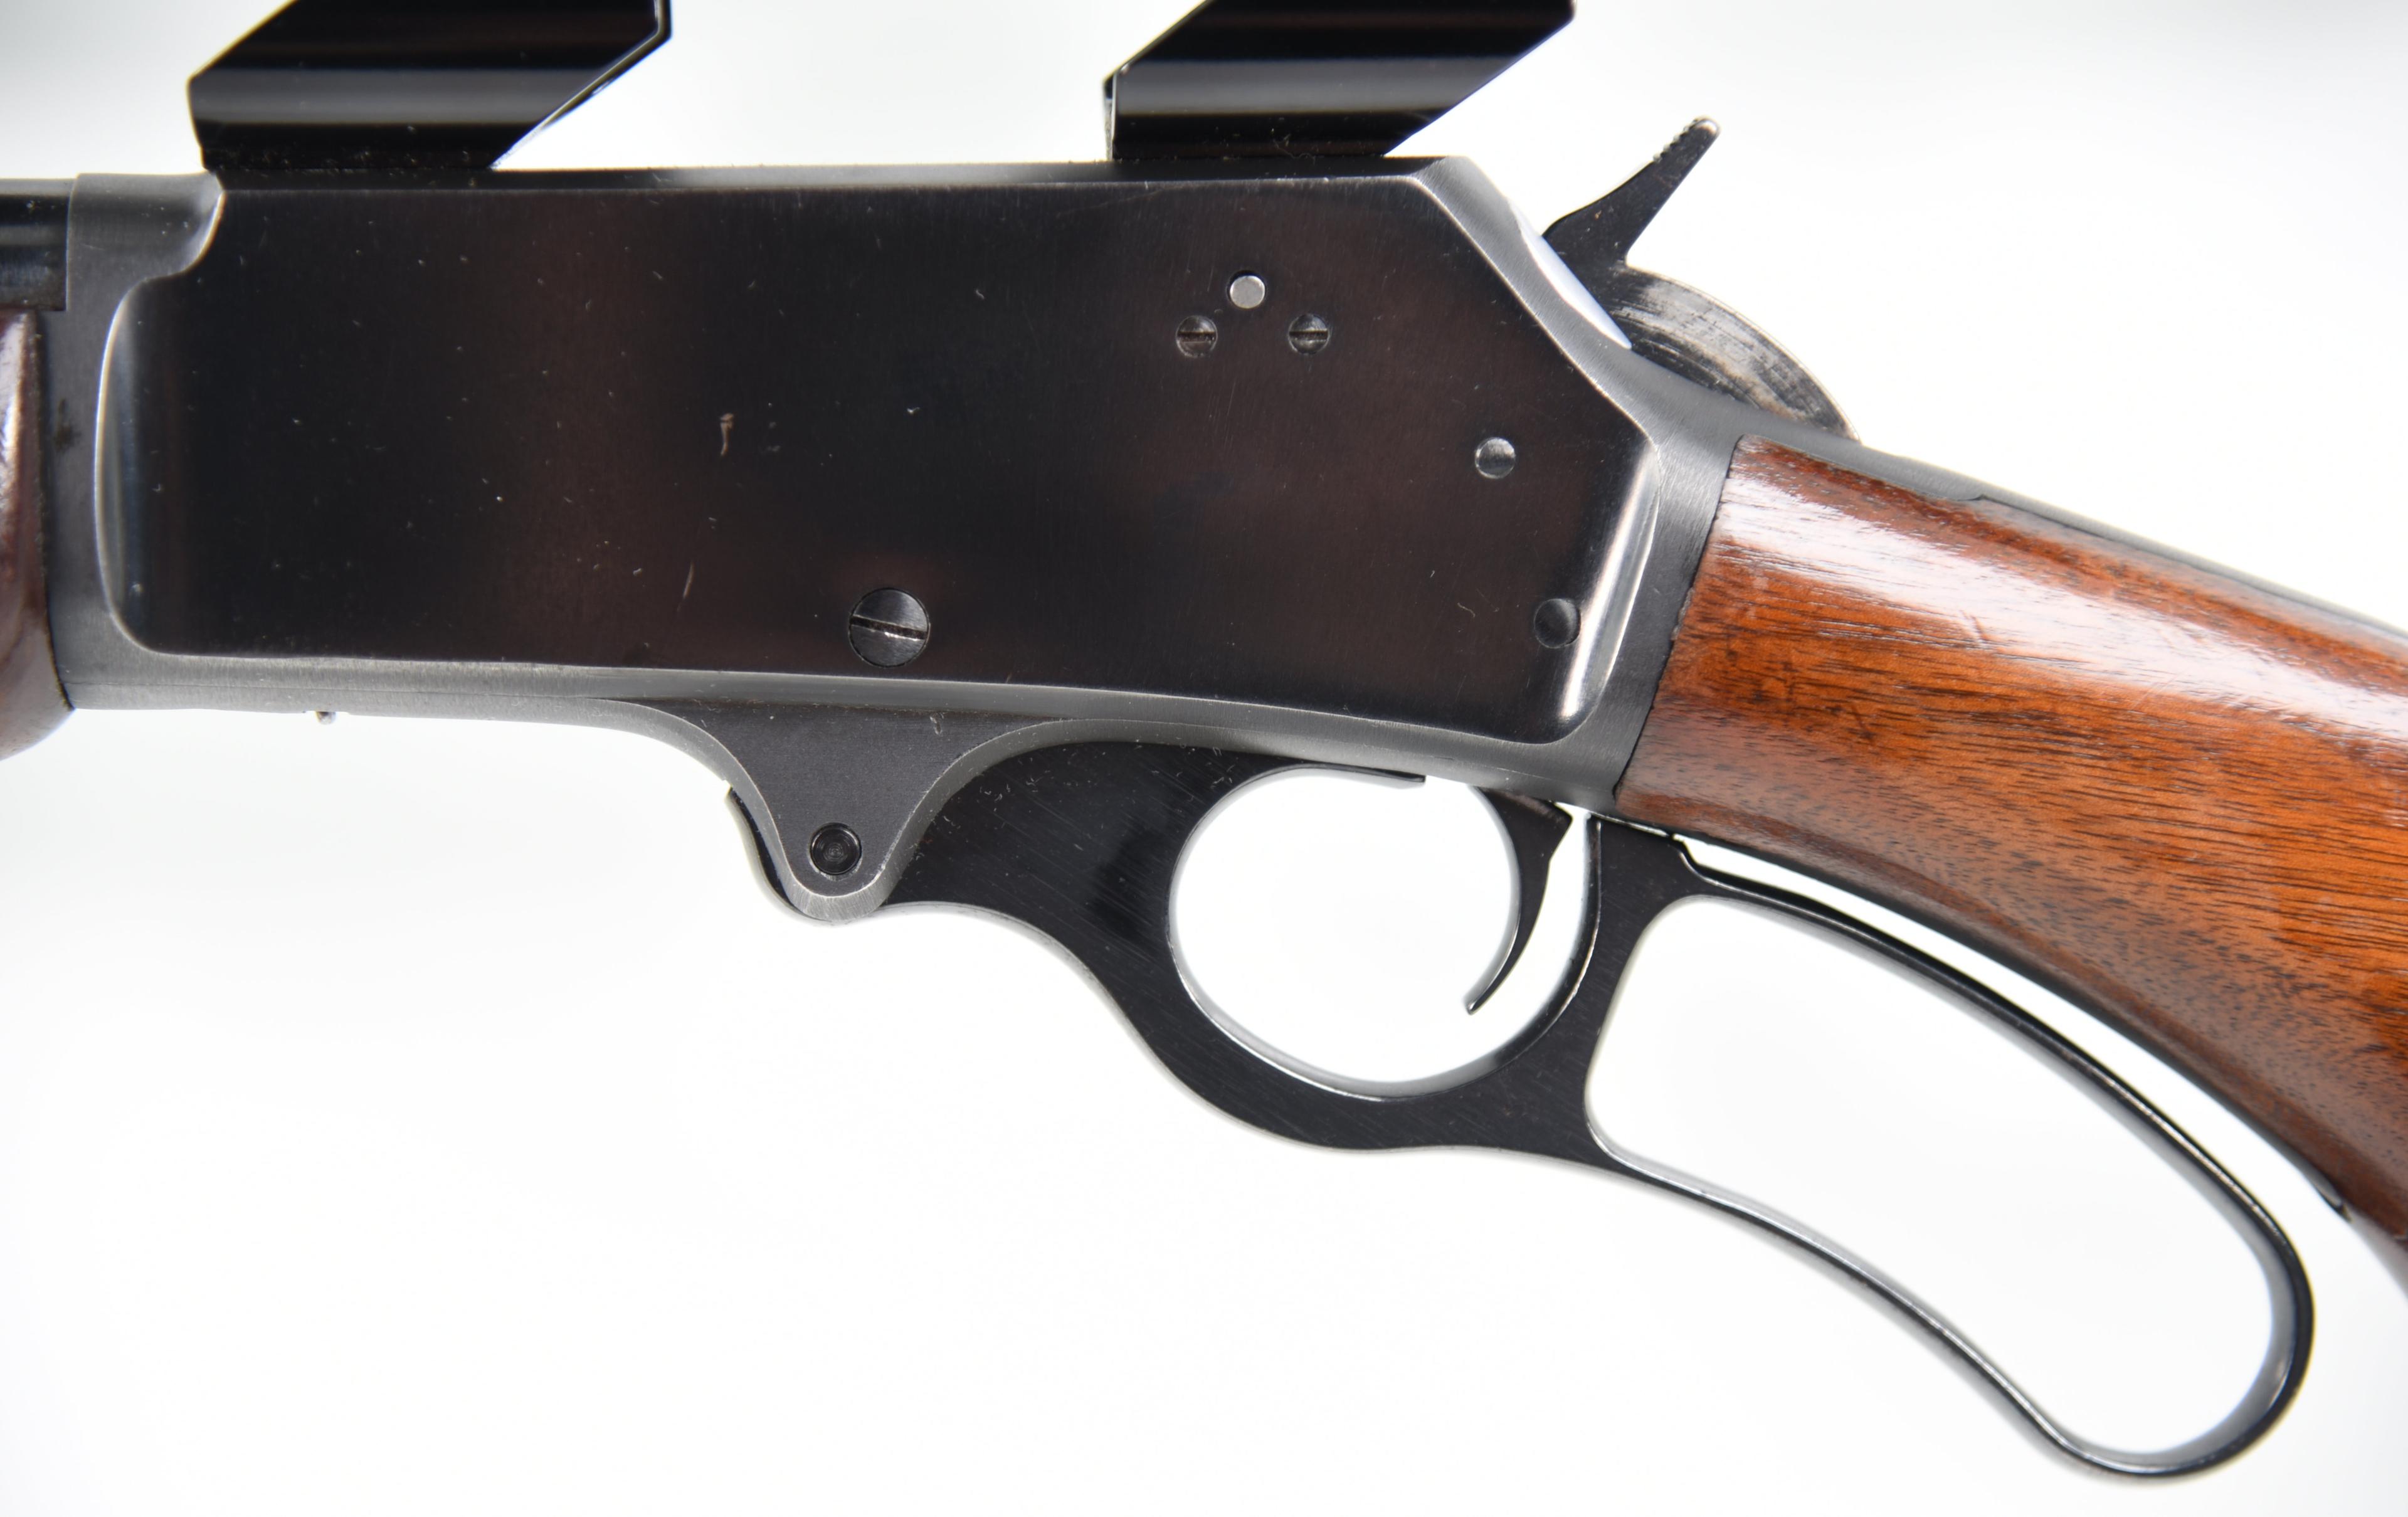 MARLIN FIREARMS CO 336A Lever Action Rifle .35 Rem.